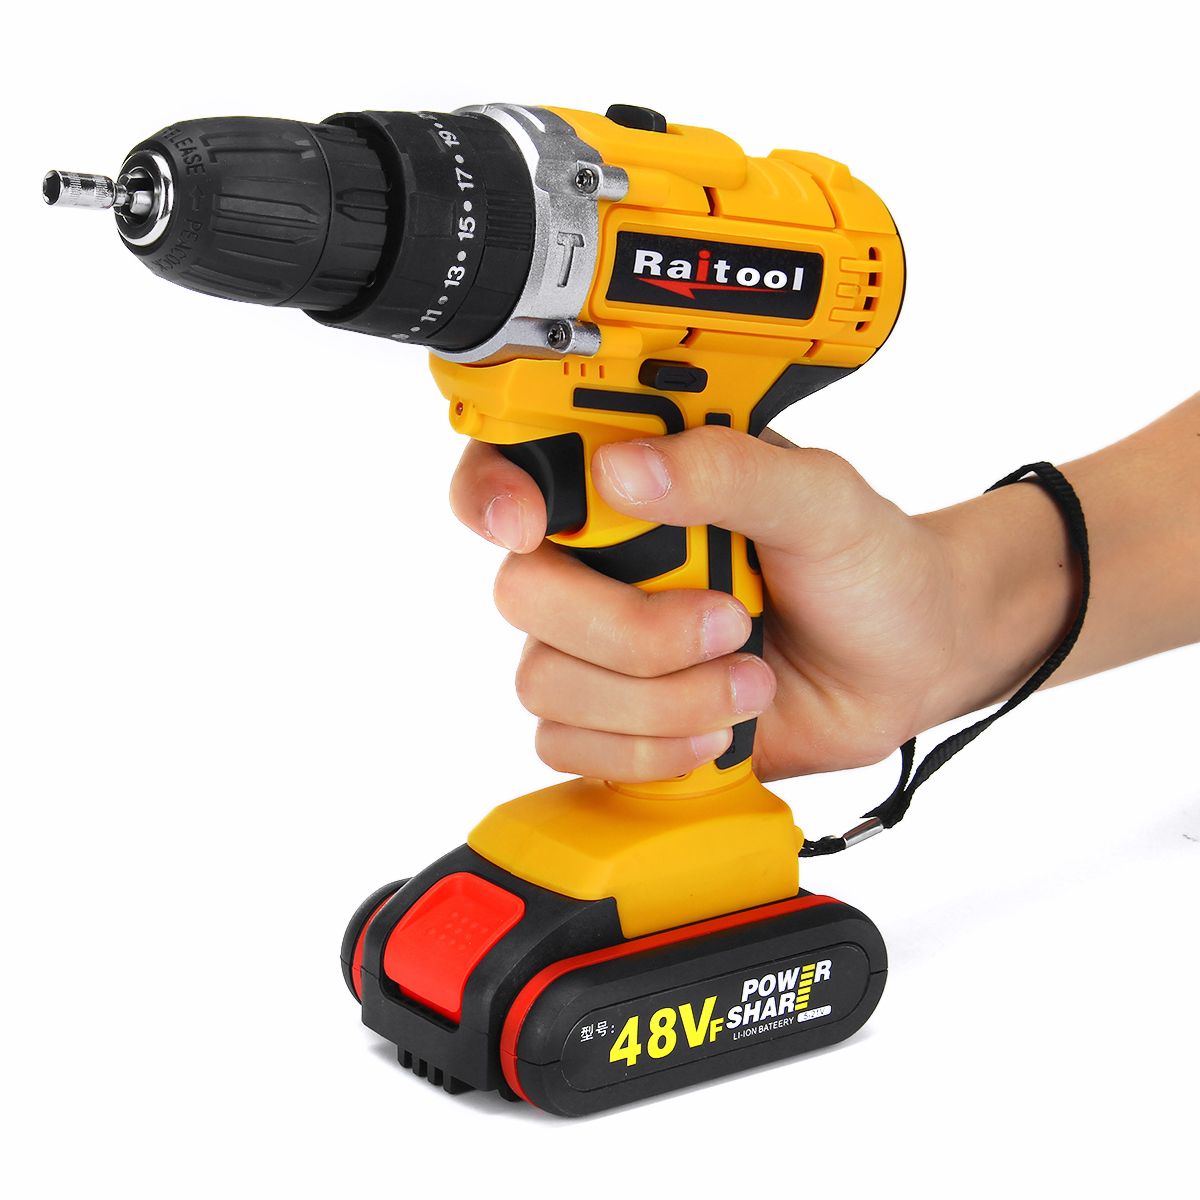 Raitool-48VF-Cordless-Electric-Impact-Drill-Rechargeable-38-inch-Drill-Screwdriver-W-1-or-2-Li-ion-B-1593335